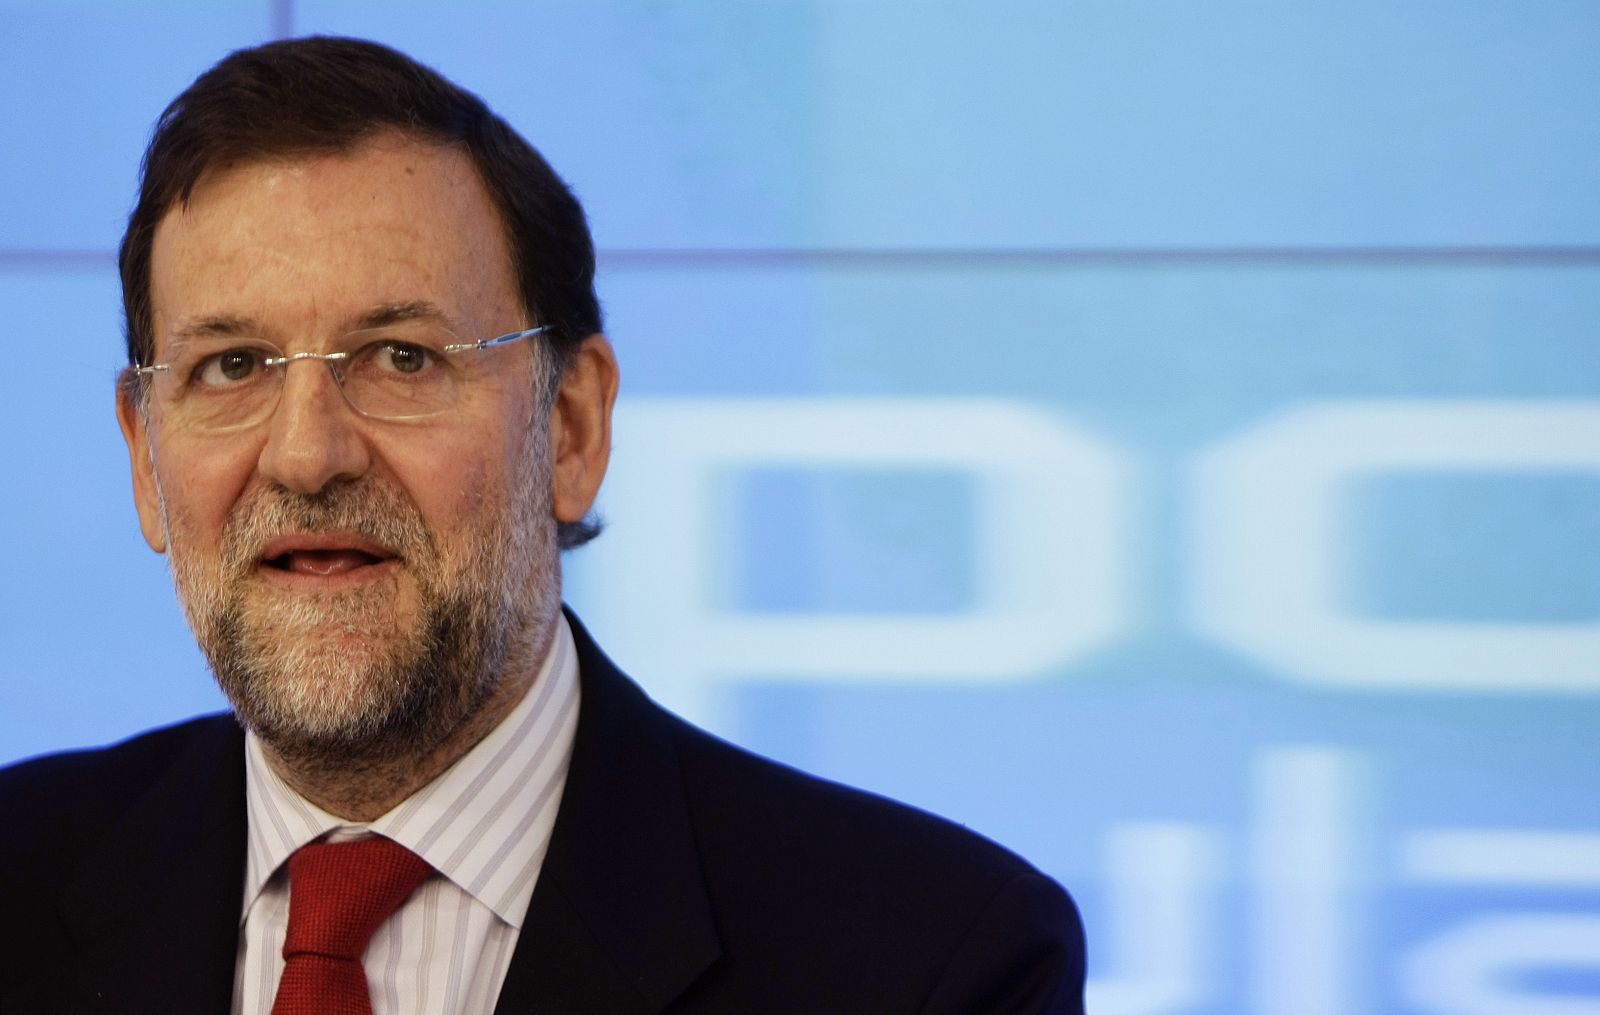 Spain's main opposition leader Rajoy presides over his Popular Party's National Board meeting  in Madrid